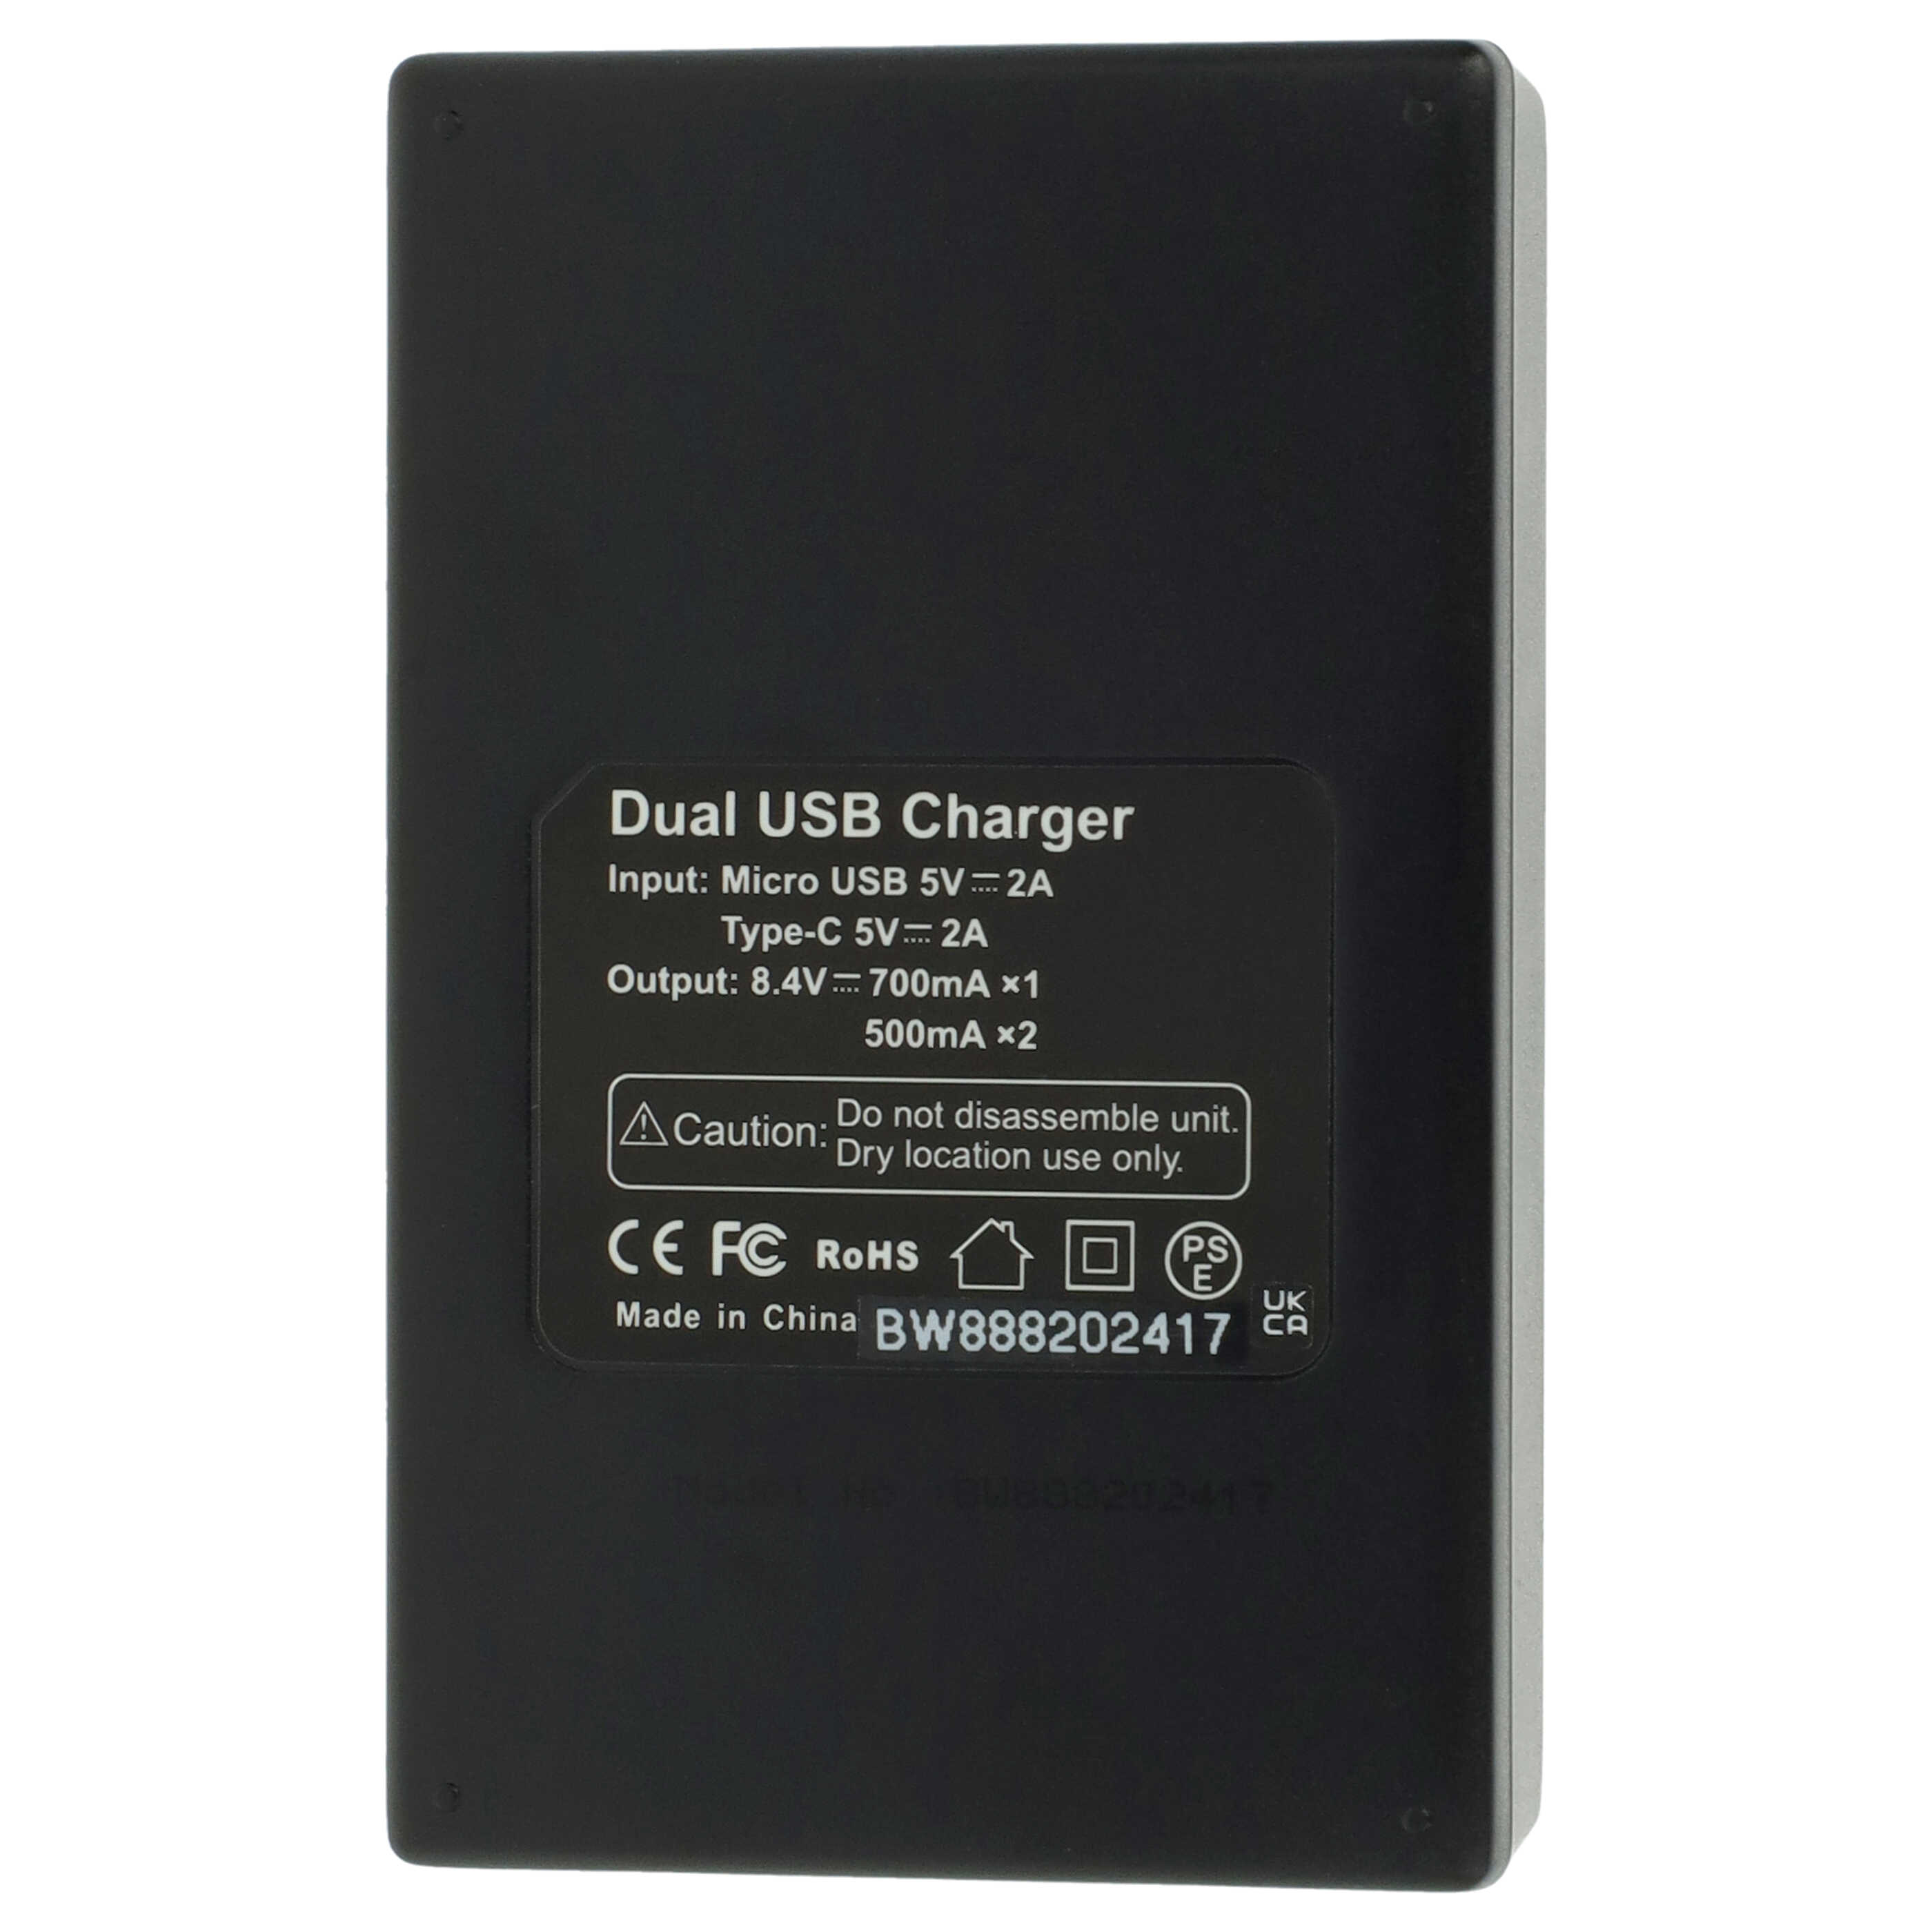 Battery Charger suitable for VmicLink5 RX+ Camera etc. - 0.5 A, 8.4 V